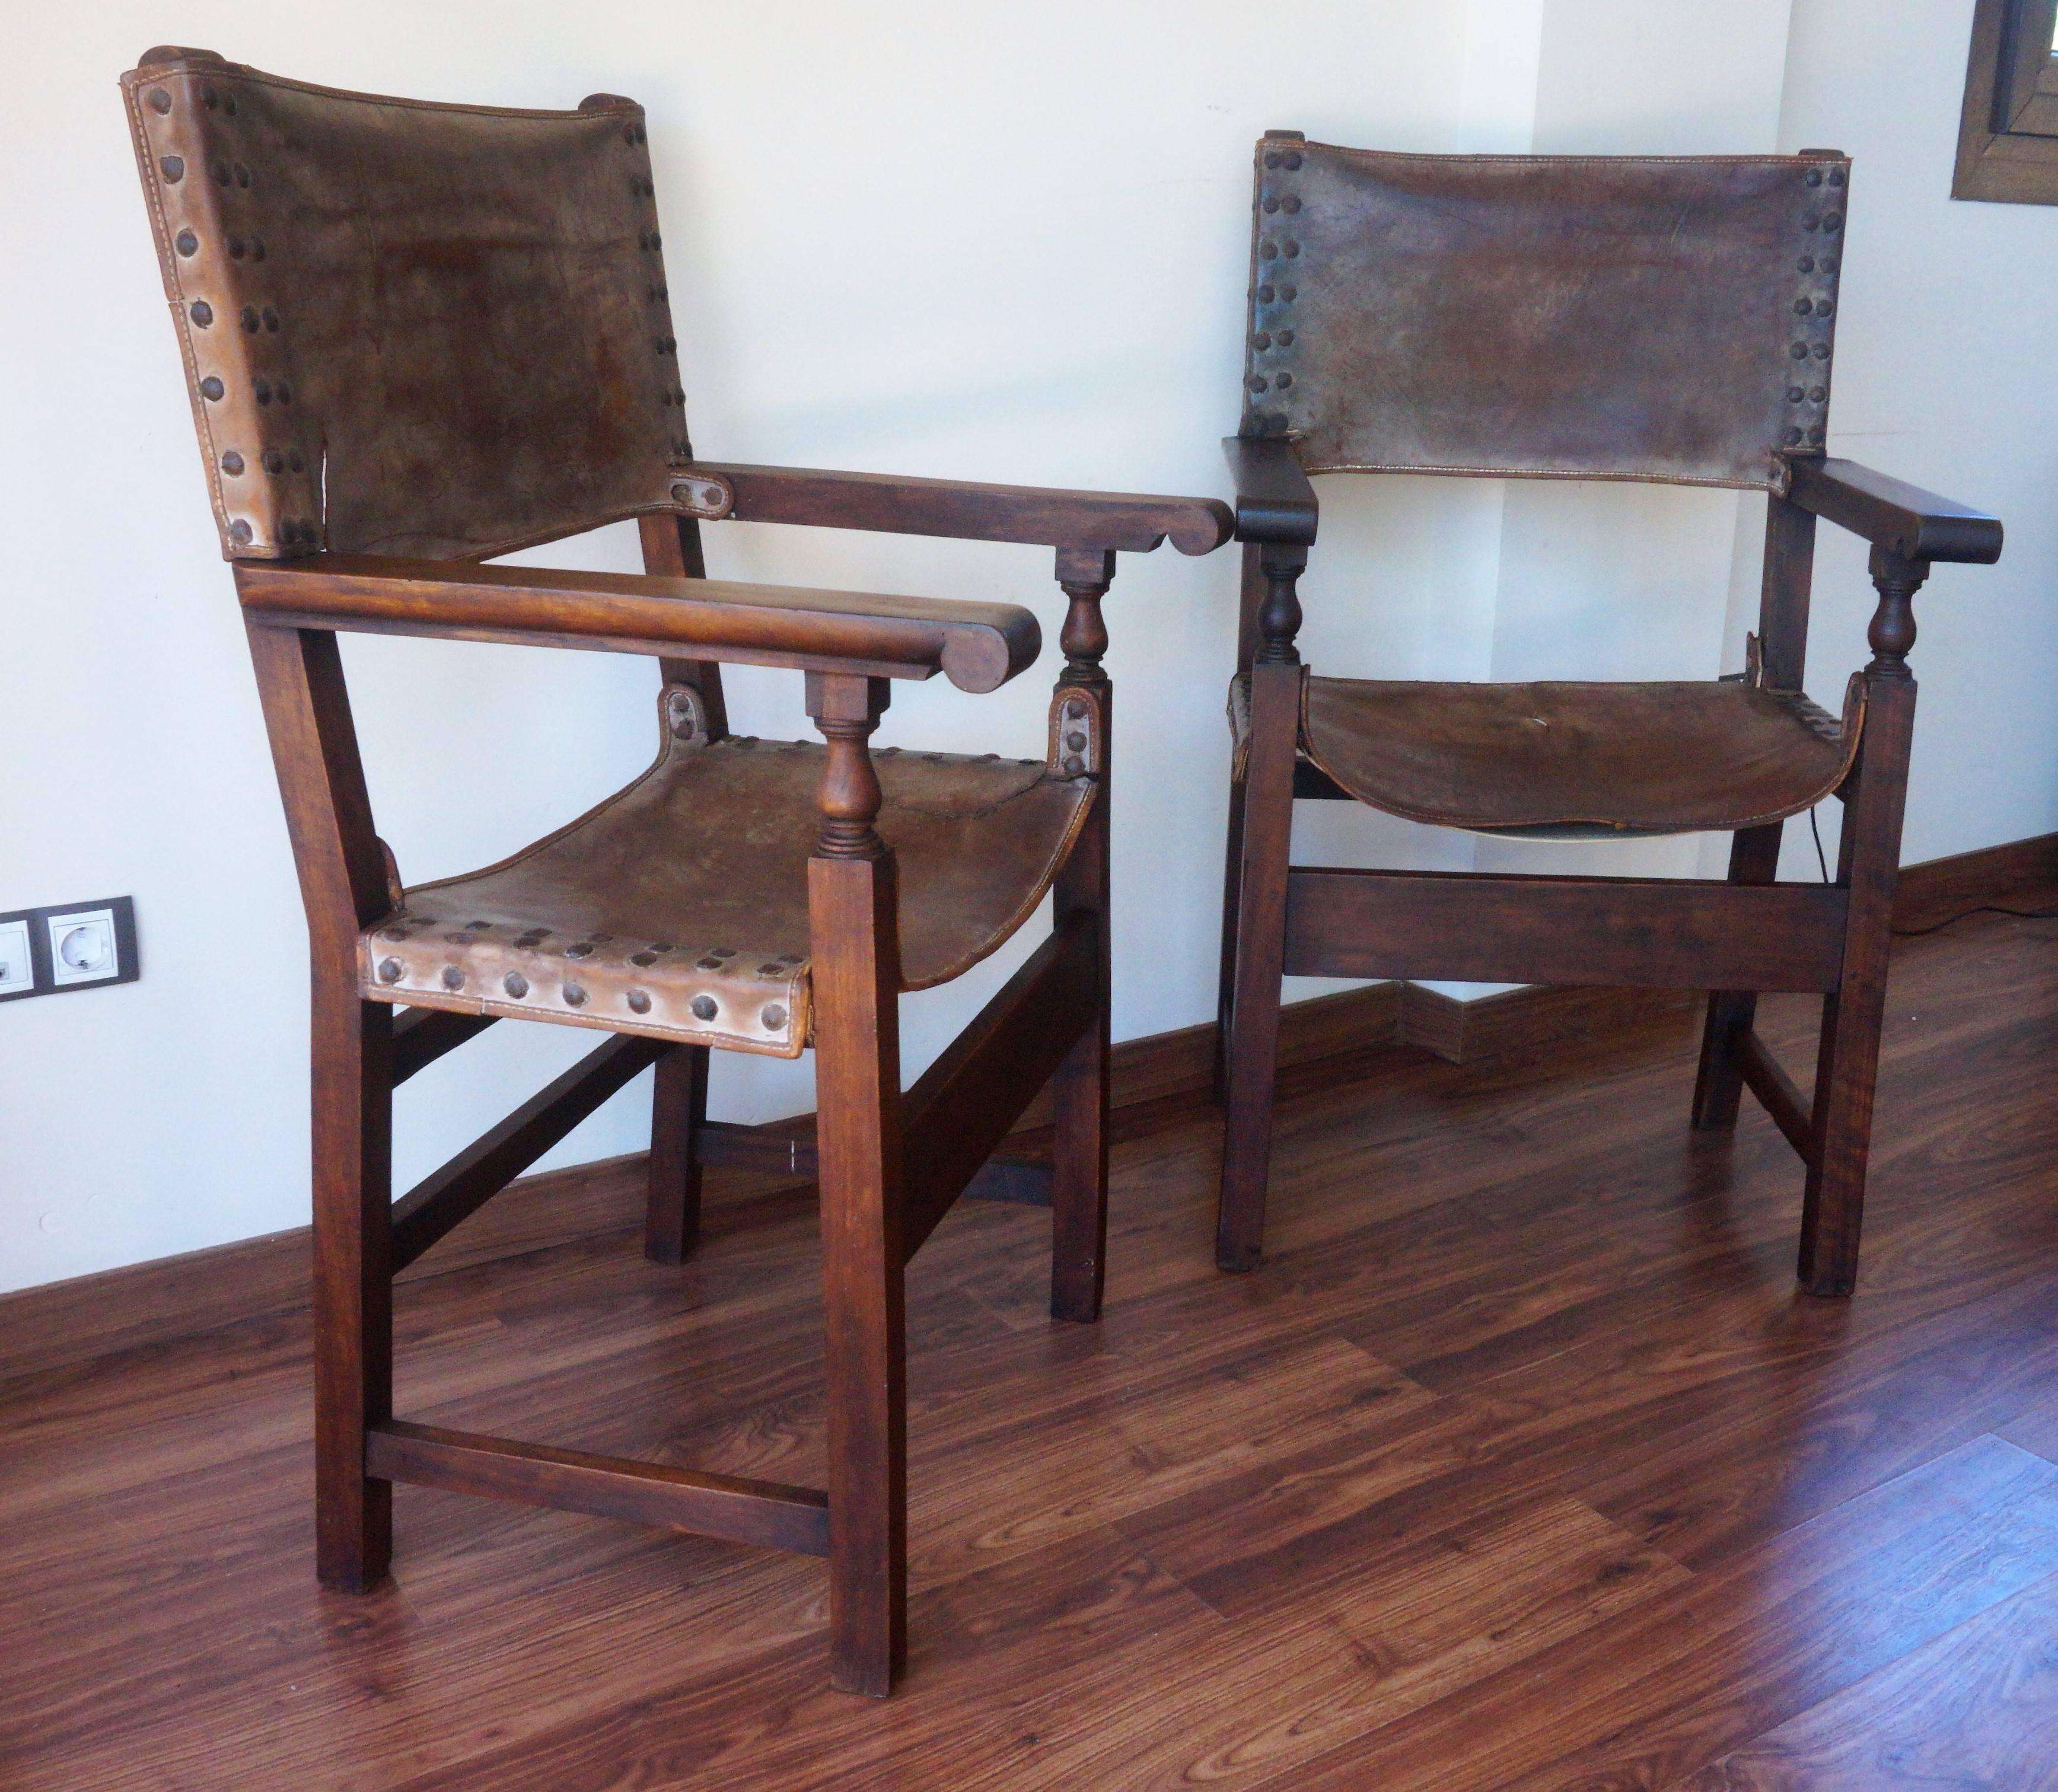 Pair of Spanish Colonial style armchairs, having leather seats and backs, brass nailheads and a beautiful patina throughout, 18th century or earlier.

